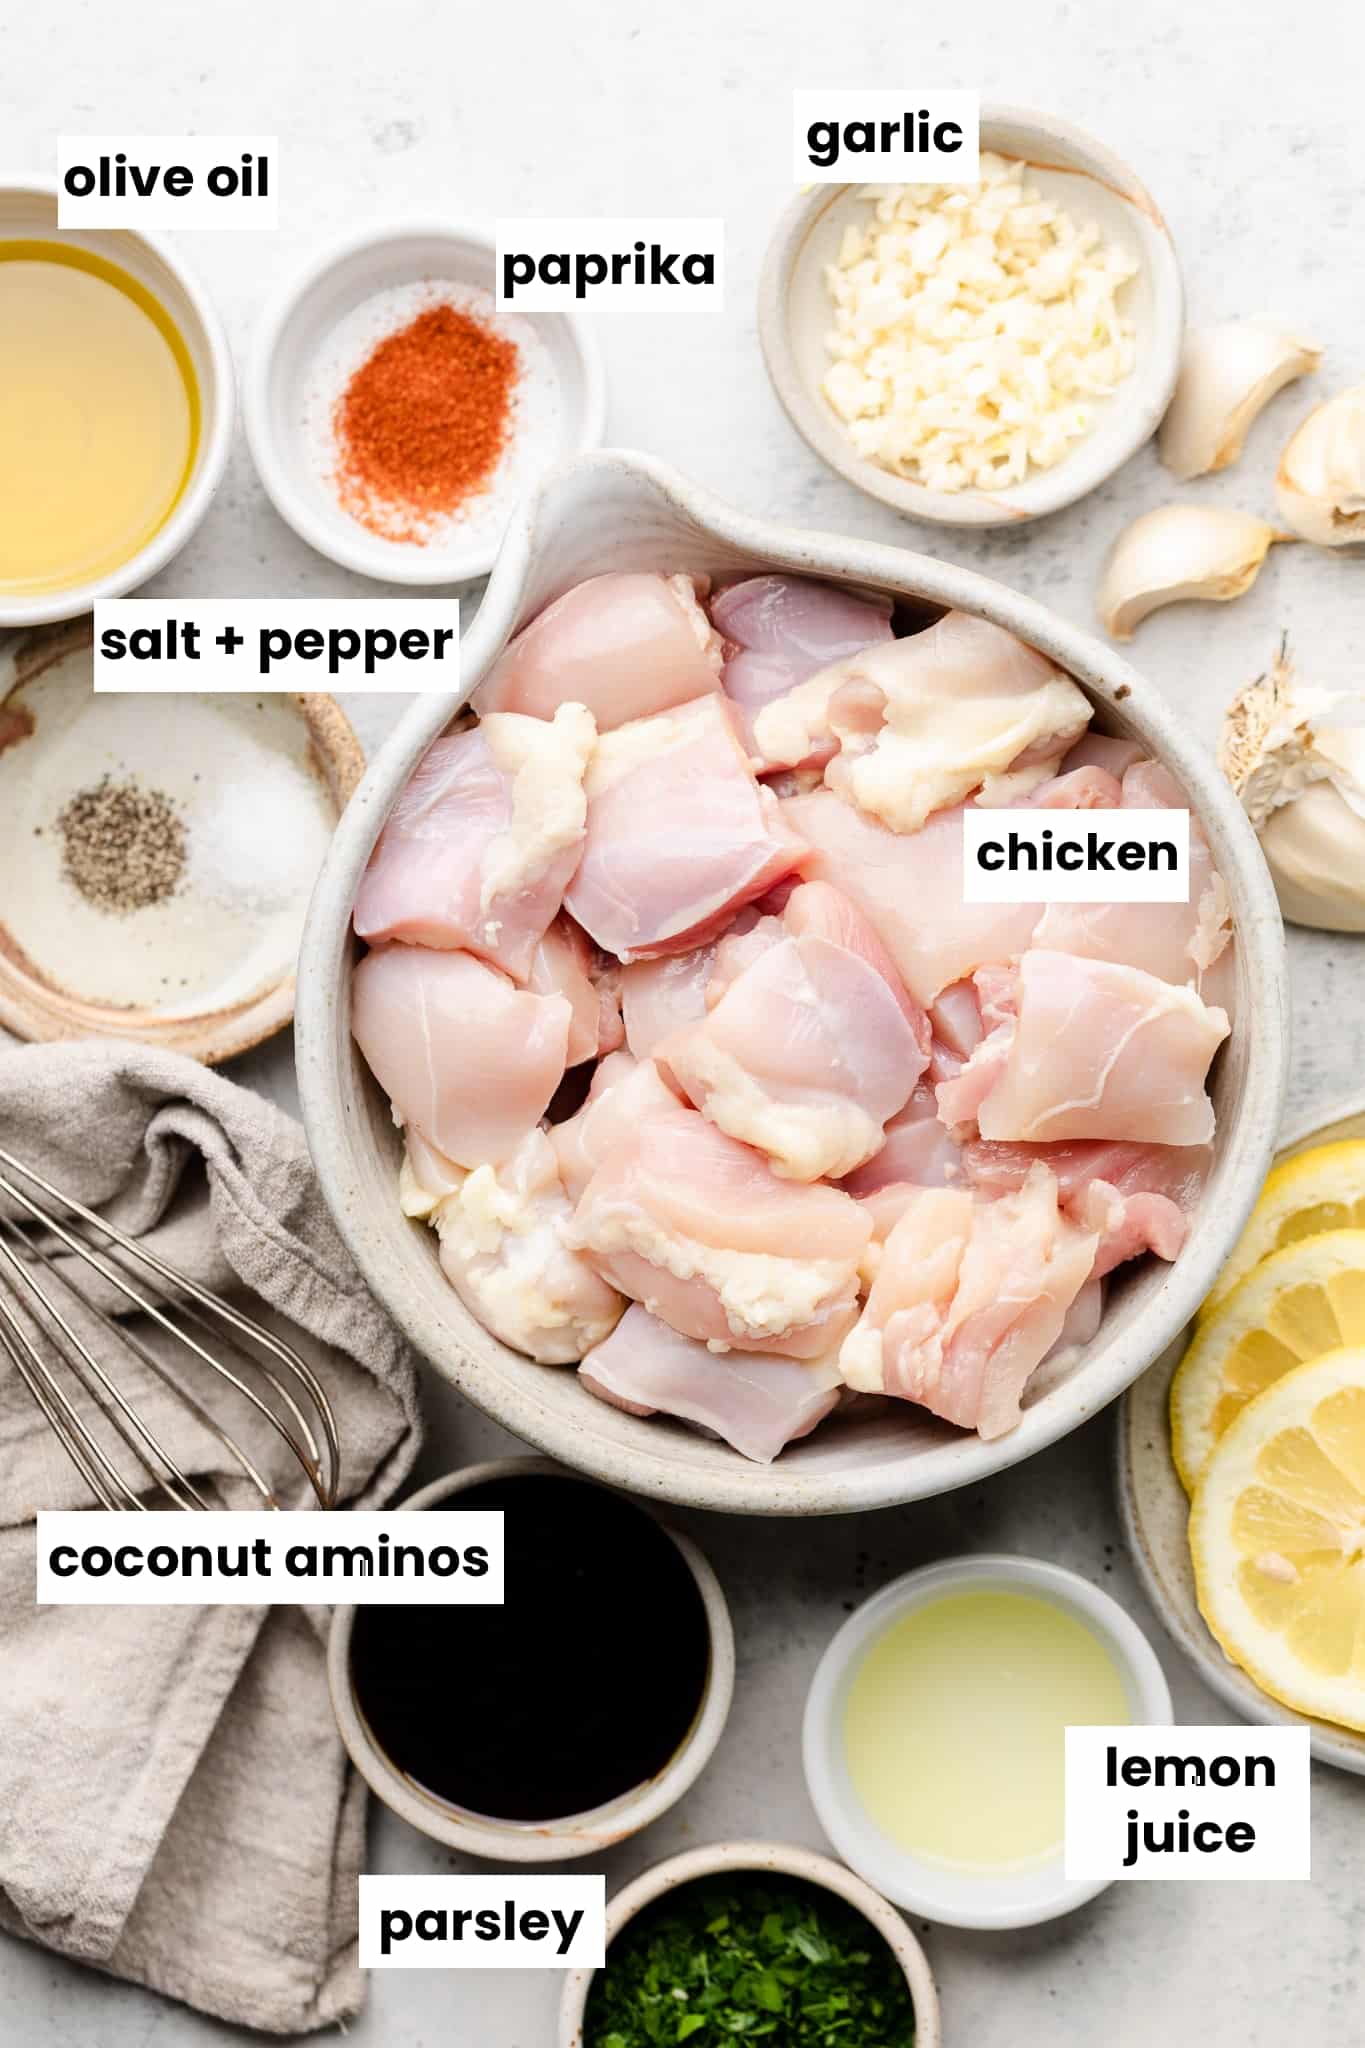 Ingredients in this recipe including chicken, lemon juice, coconut aminos, salt, pepper, paprika, parsley, olive oil, and garlic.